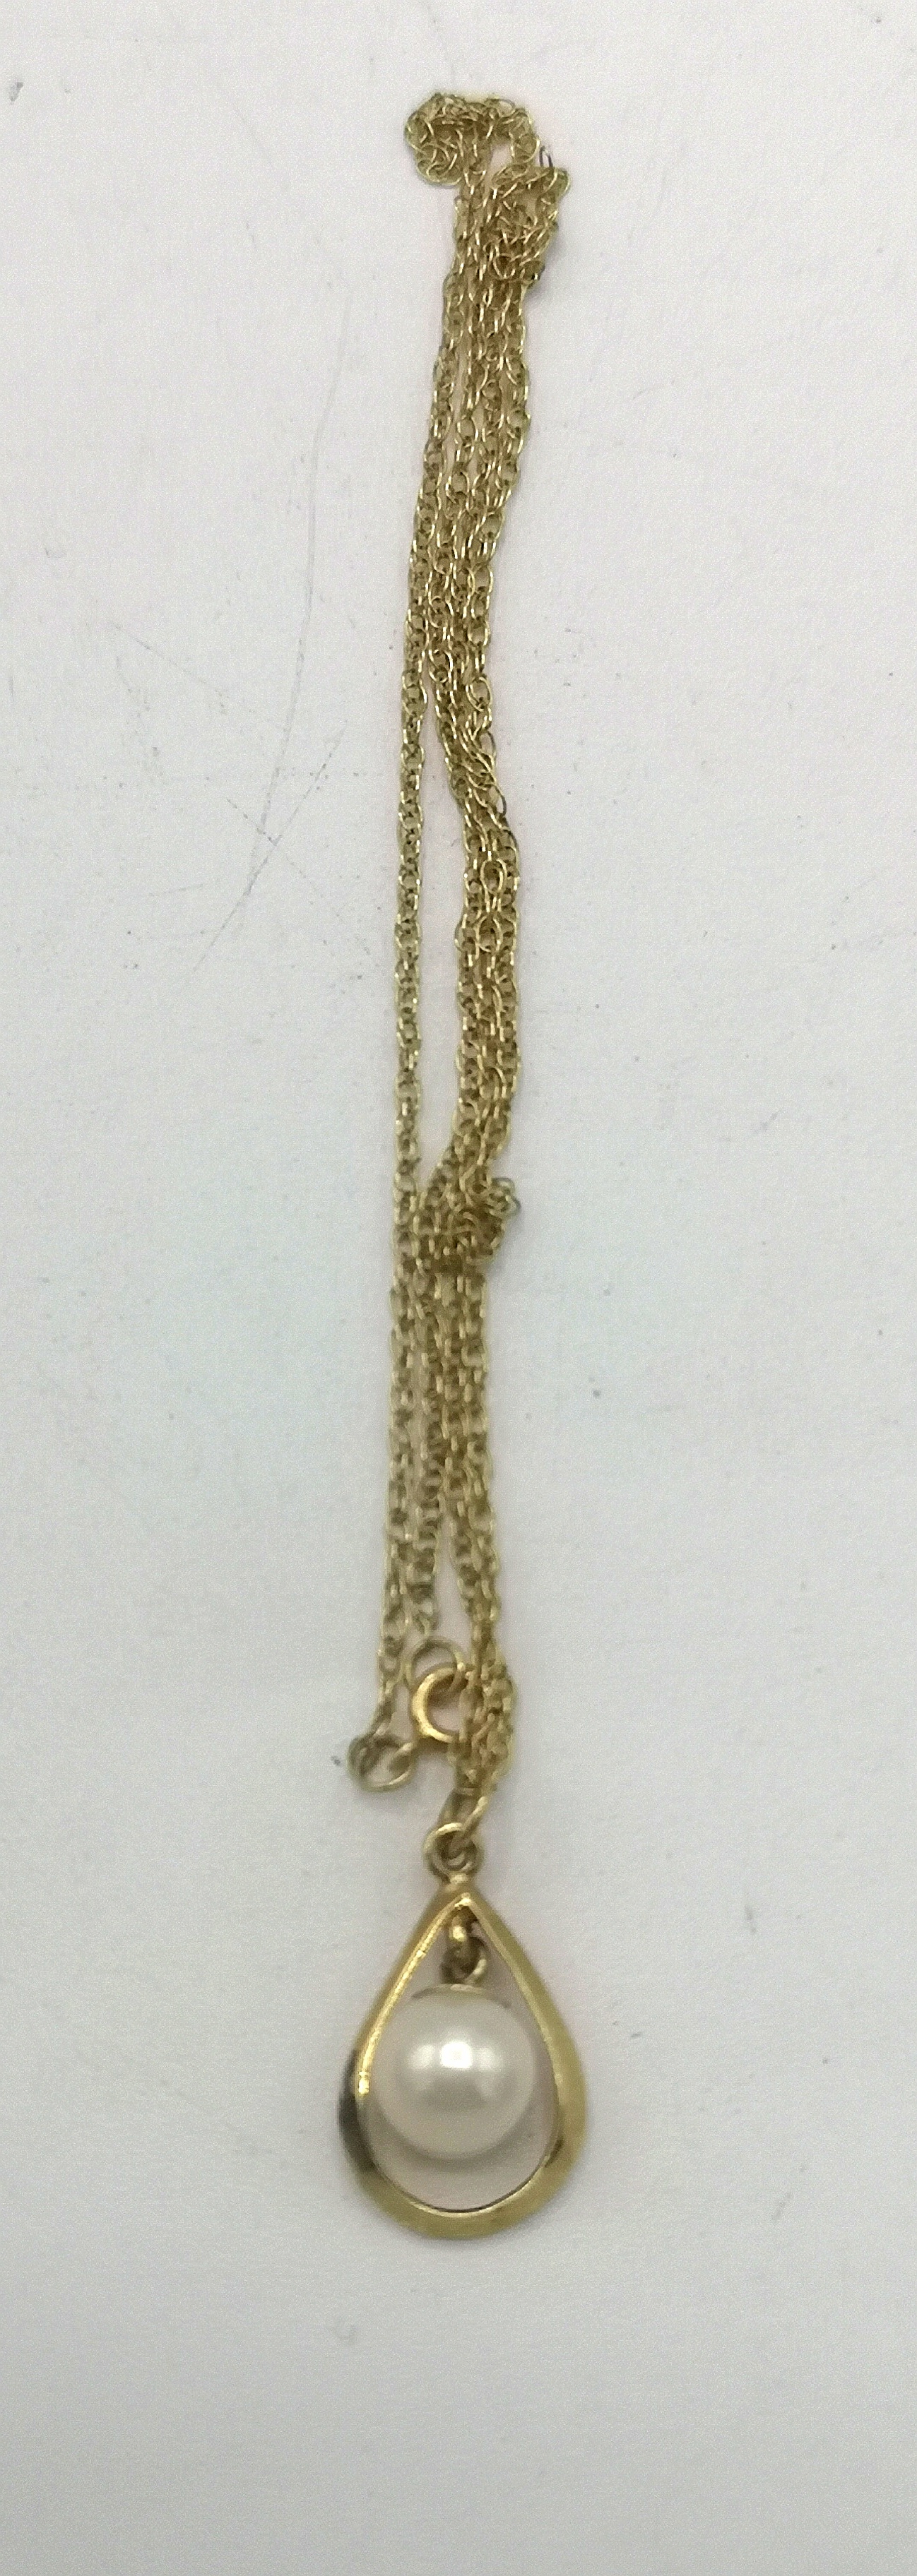 Three 9ct gold necklaces and pendants - Image 6 of 9